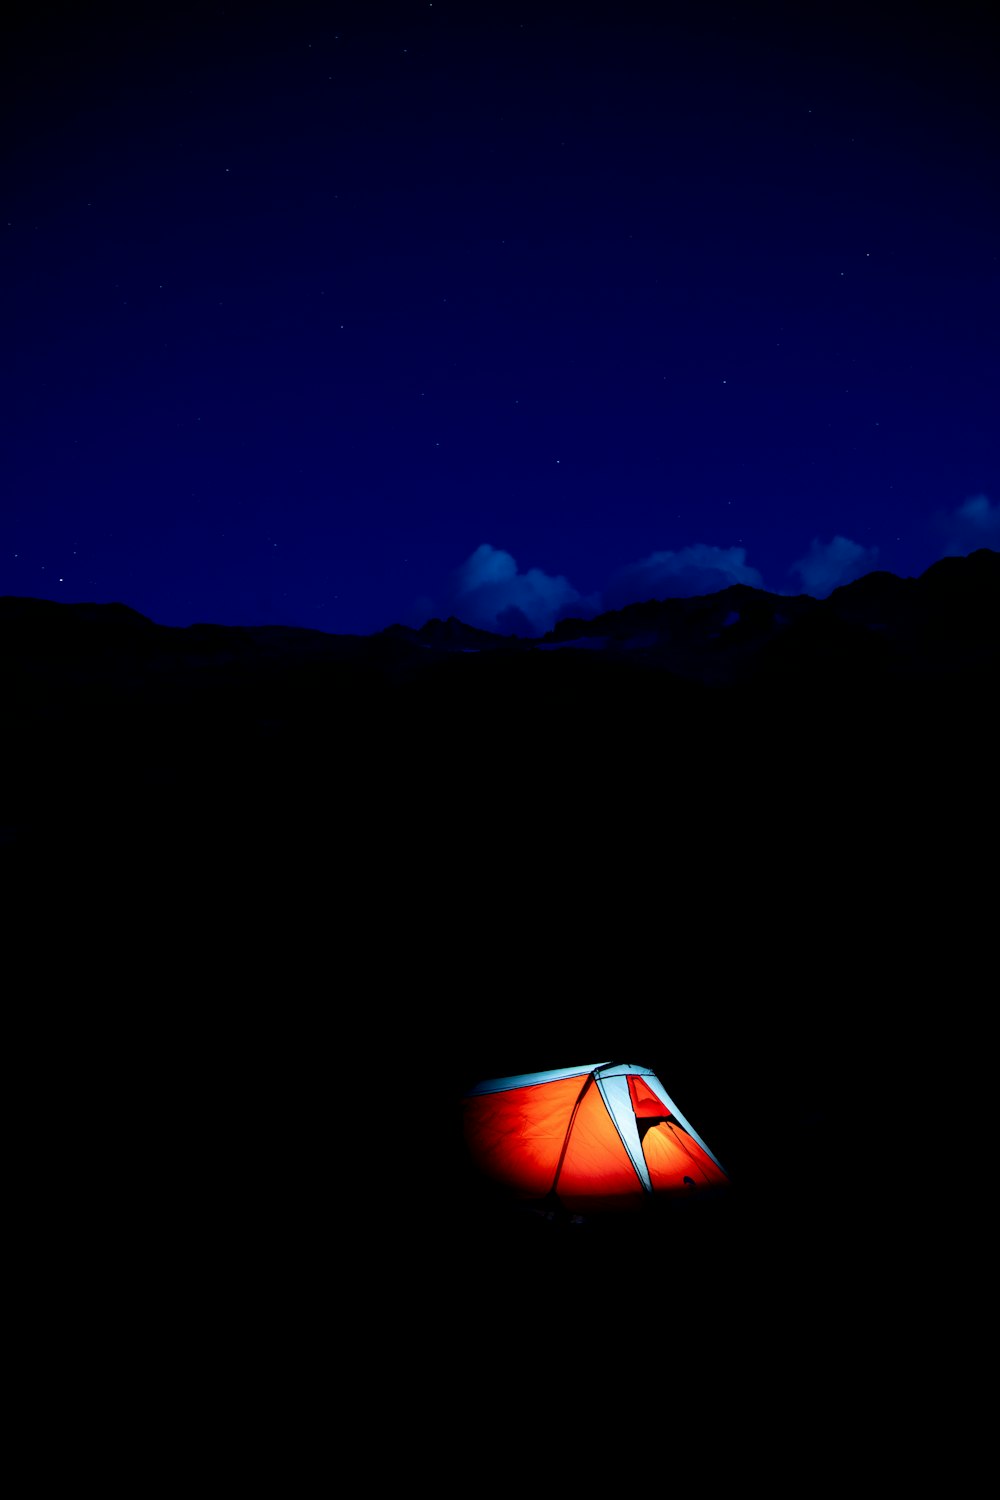 white and red tent on mountain during night time